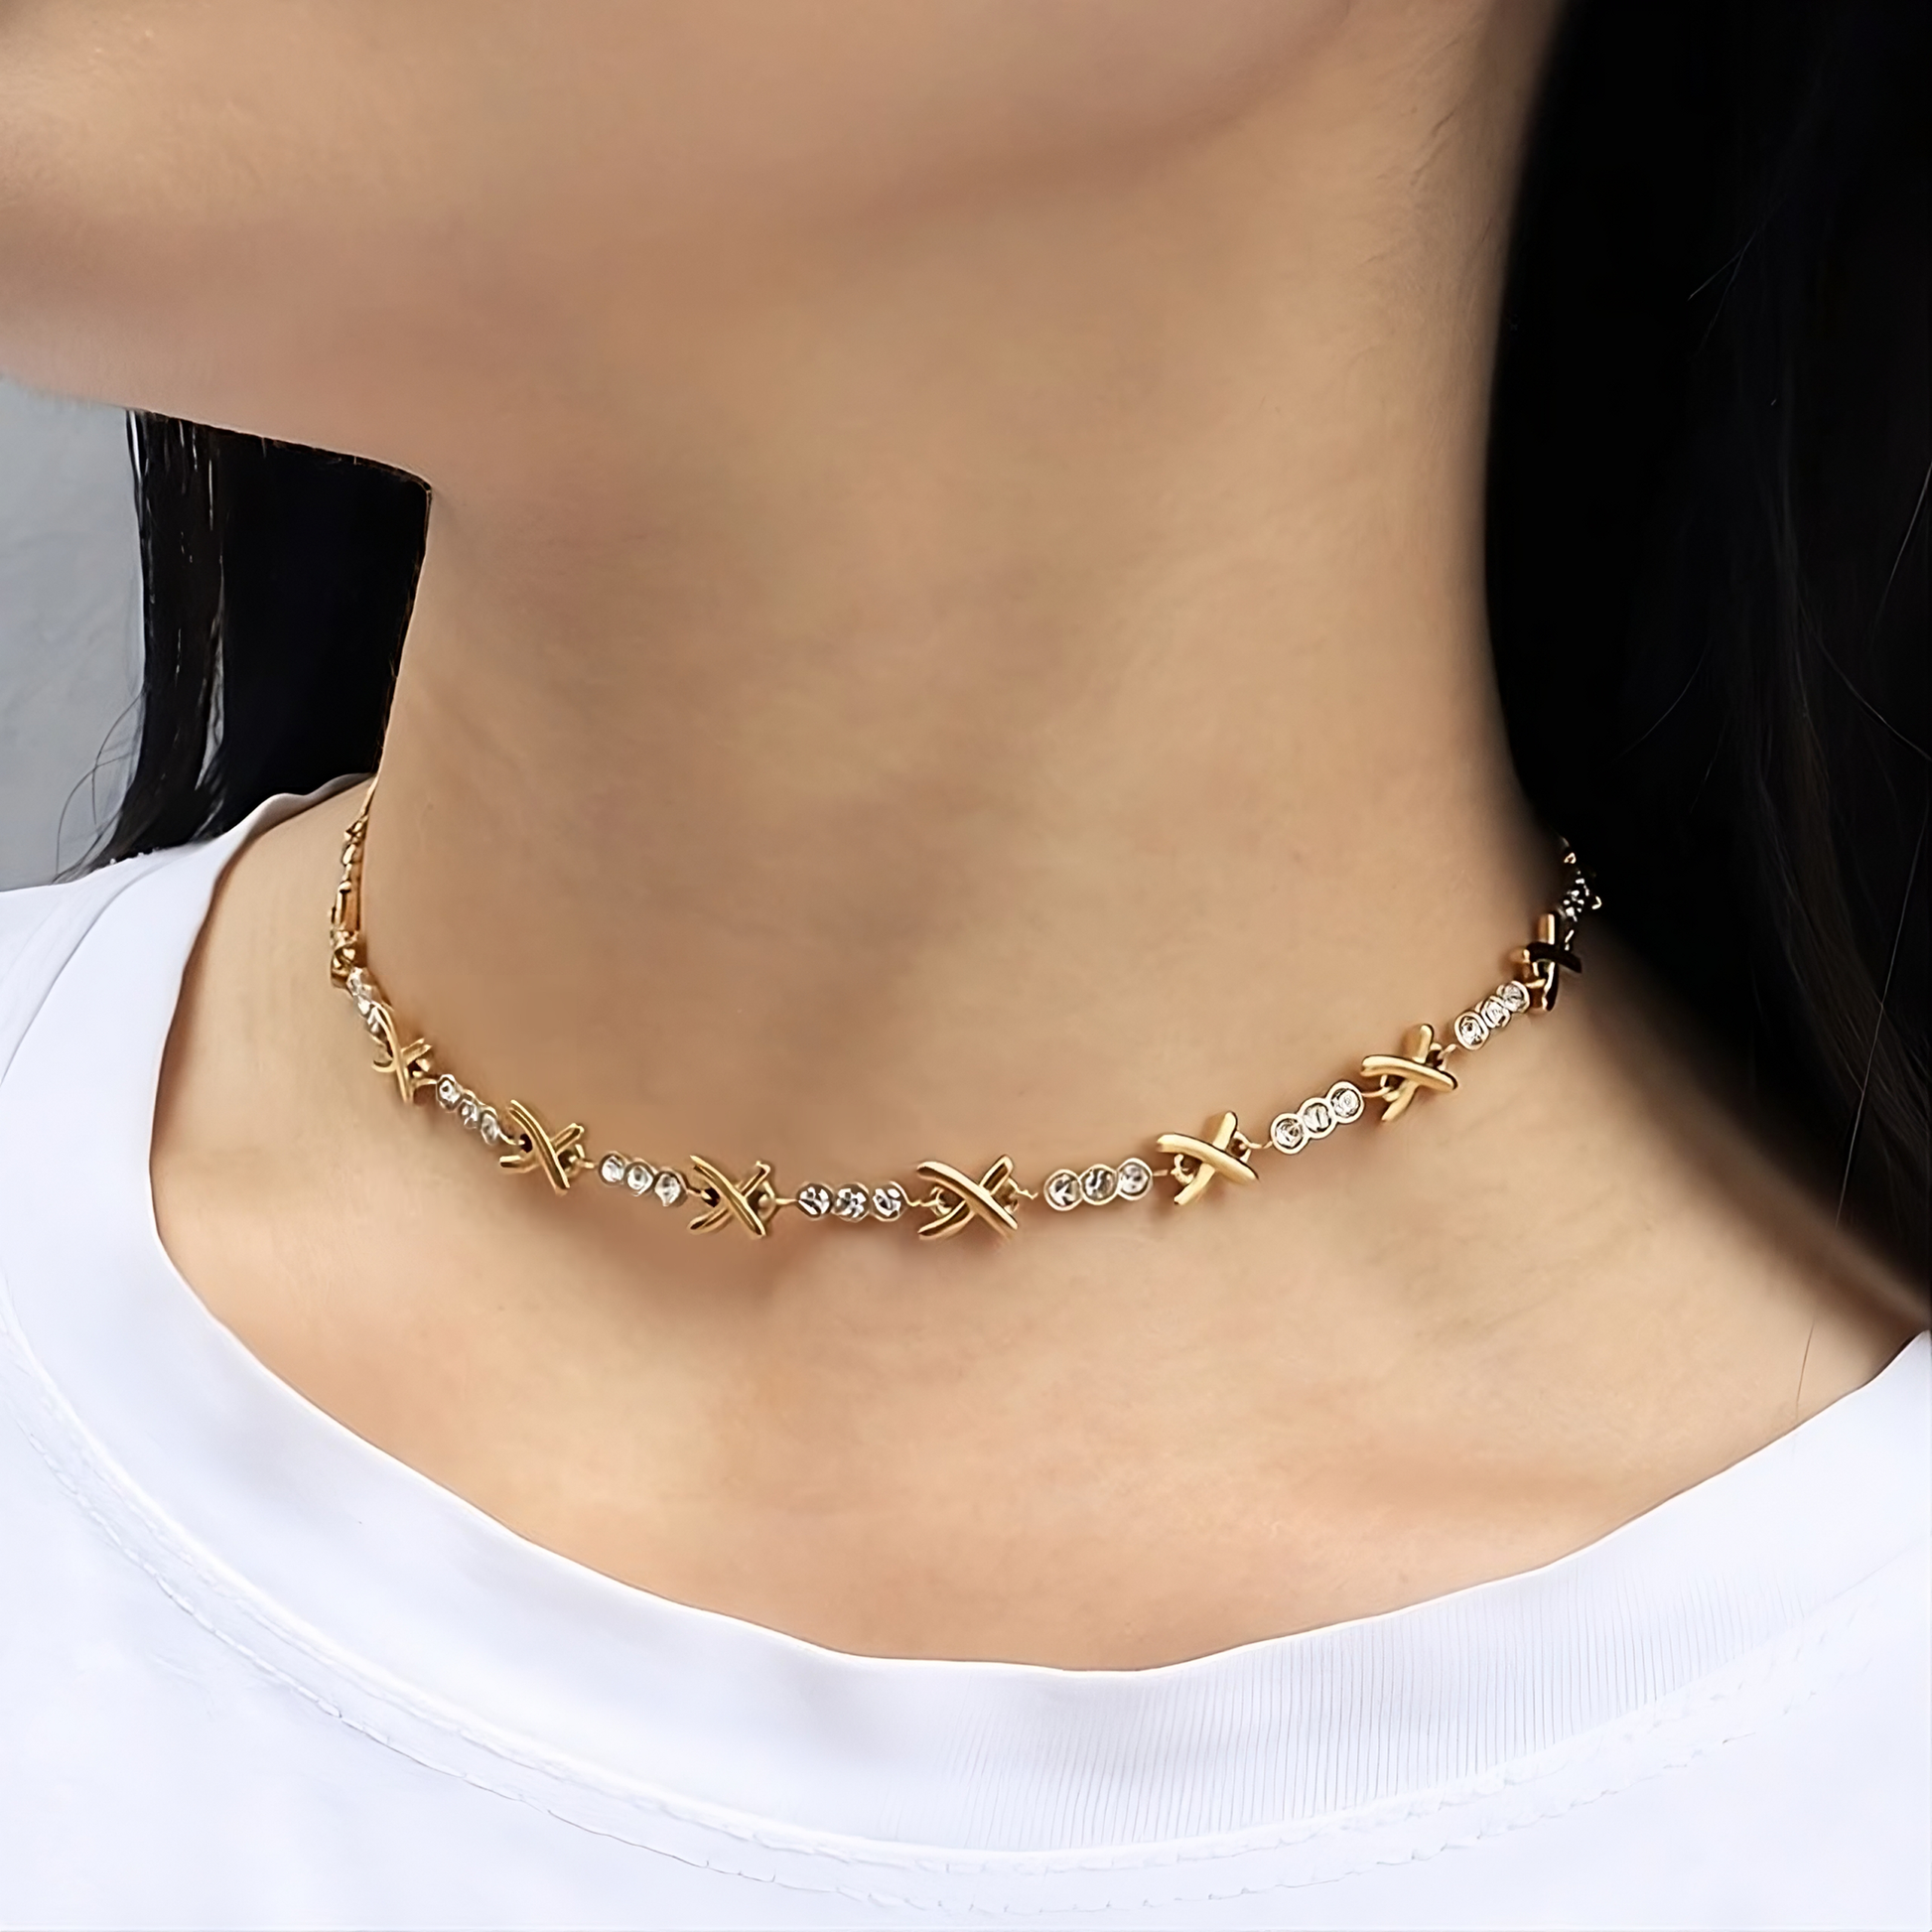 Gemma Owen Inspired Crystal XO Gold and Silver Choker Necklace and Bracelet Set - Mia Ishaaq